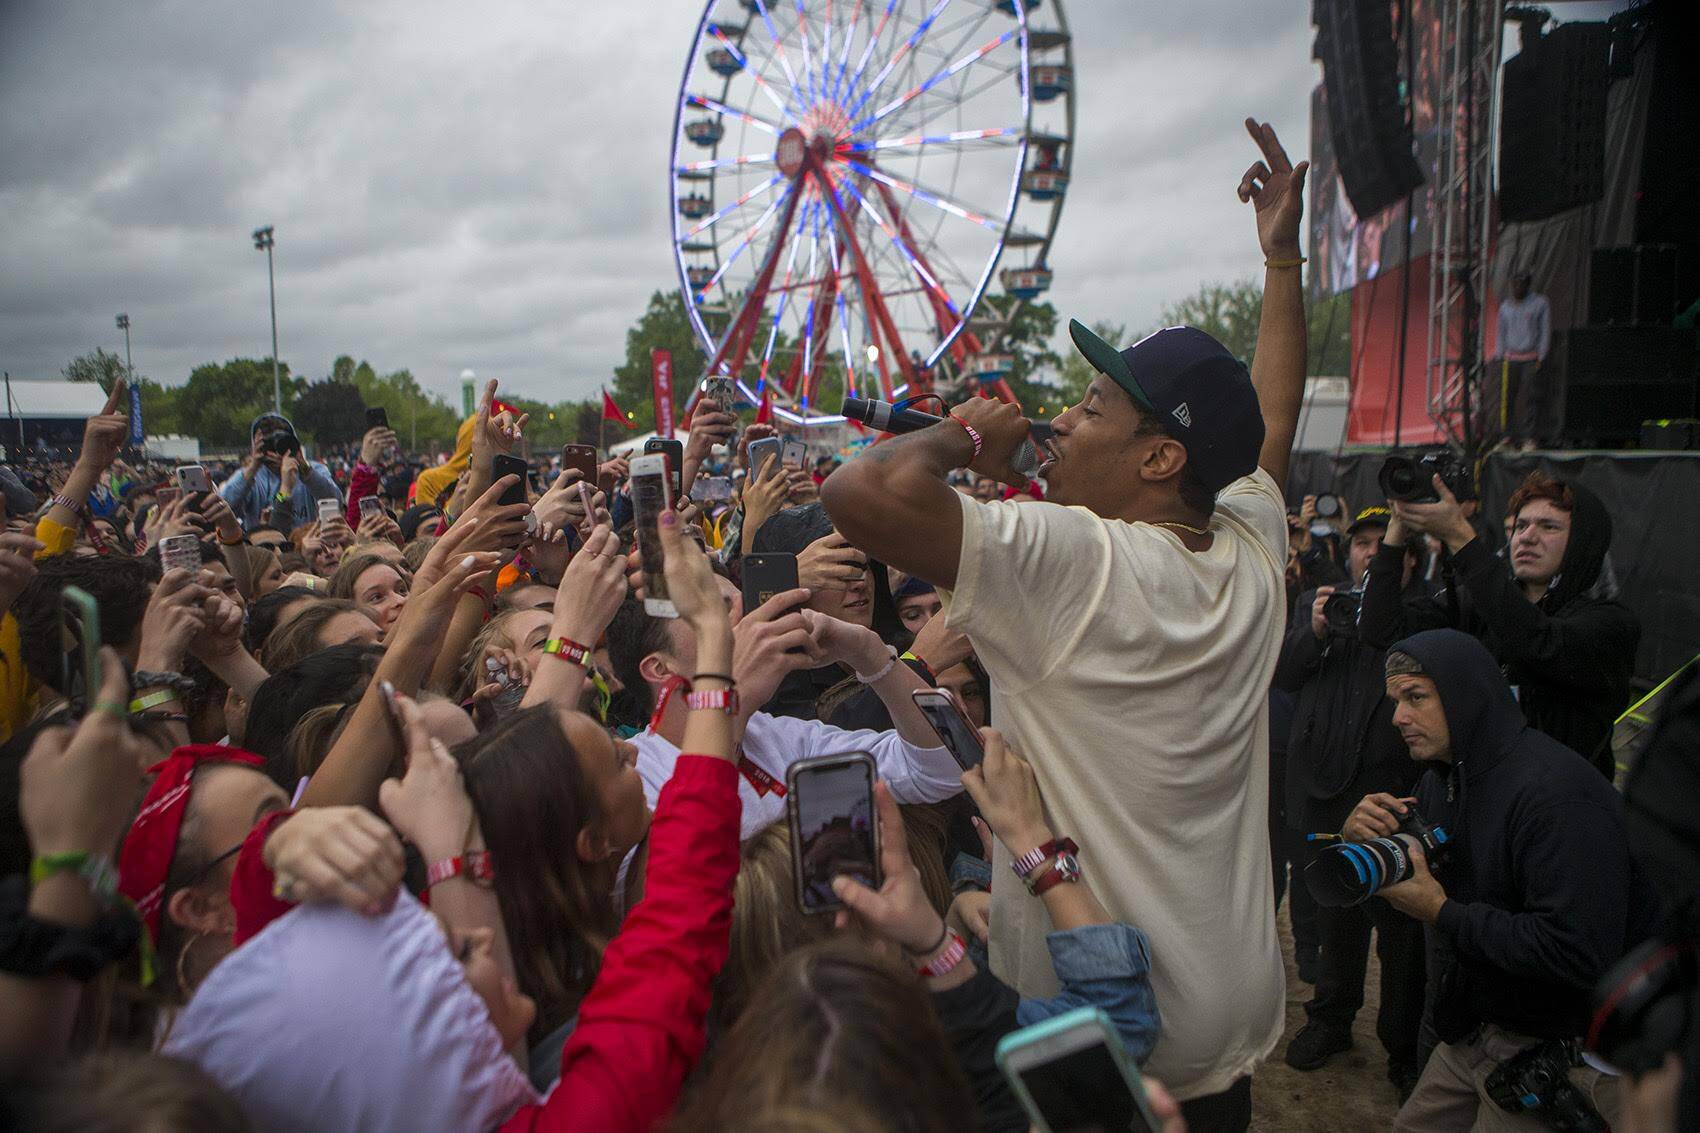 Boston-based Cousin Stizz greets the crowd during his performance at Boston Calling in 2018. (Jesse Costa/WBUR)